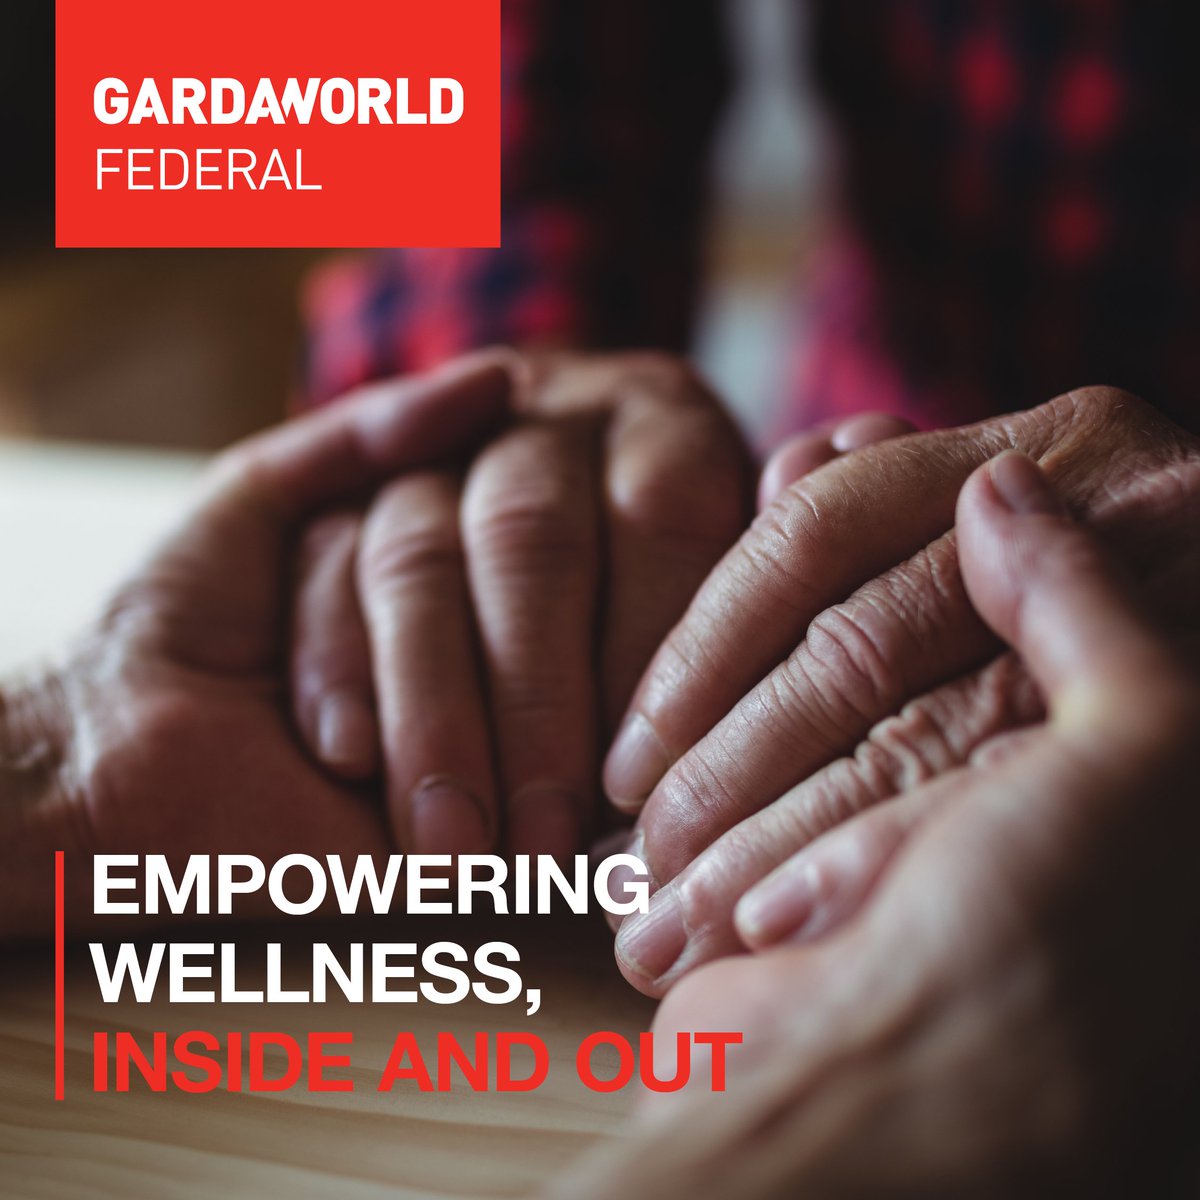 May marks Mental Health Awareness Month. GardaWorld Federal encourages everyone to prioritize self-care, both physically and mentally. Together, let's foster a culture of well-being.

#WellnessMatters #HealthyLiving